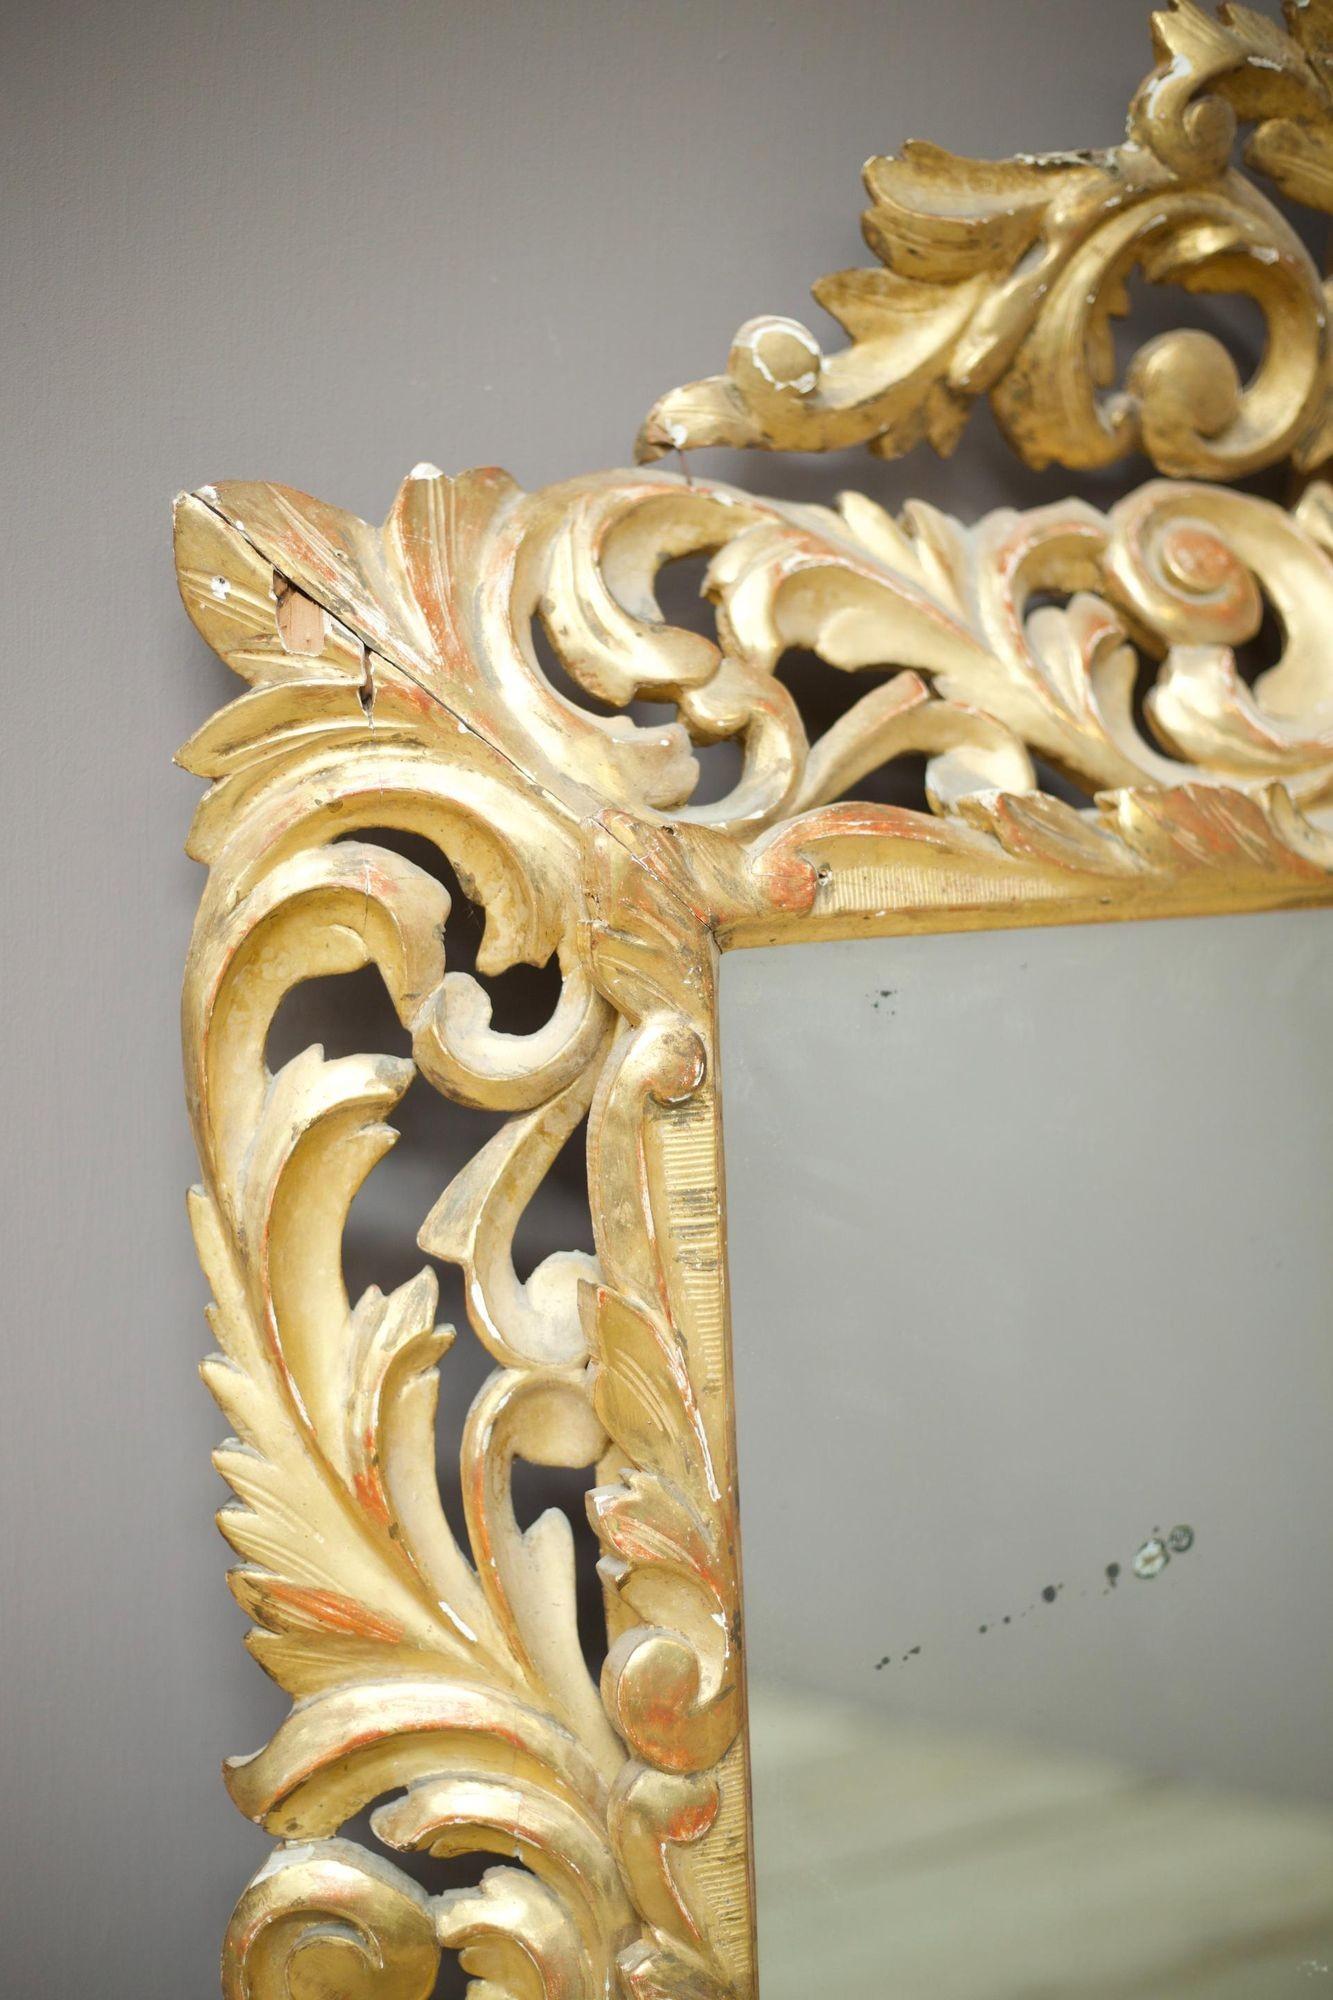 This is an exceptional early 19th century Italian Giltwood mirror in very good overall condition considering its fragile nature. This mirror is an impressive size and has a very clean mirror plate with light foxing. The gilt decoration has a lovely